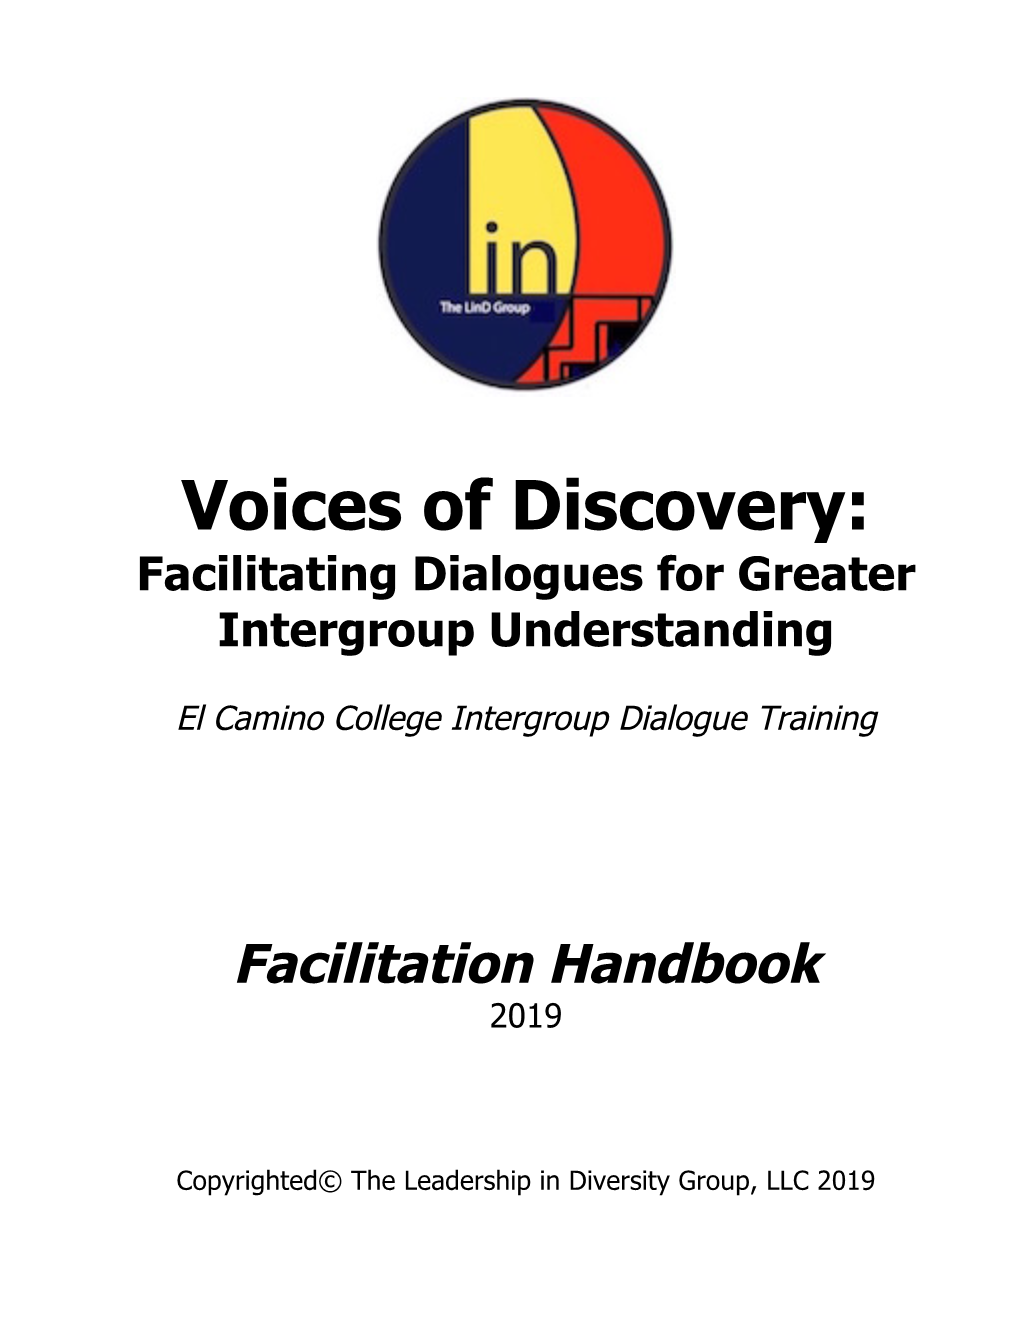 Voices of Discovery: Facilitating Dialogues for Greater Intergroup Understanding